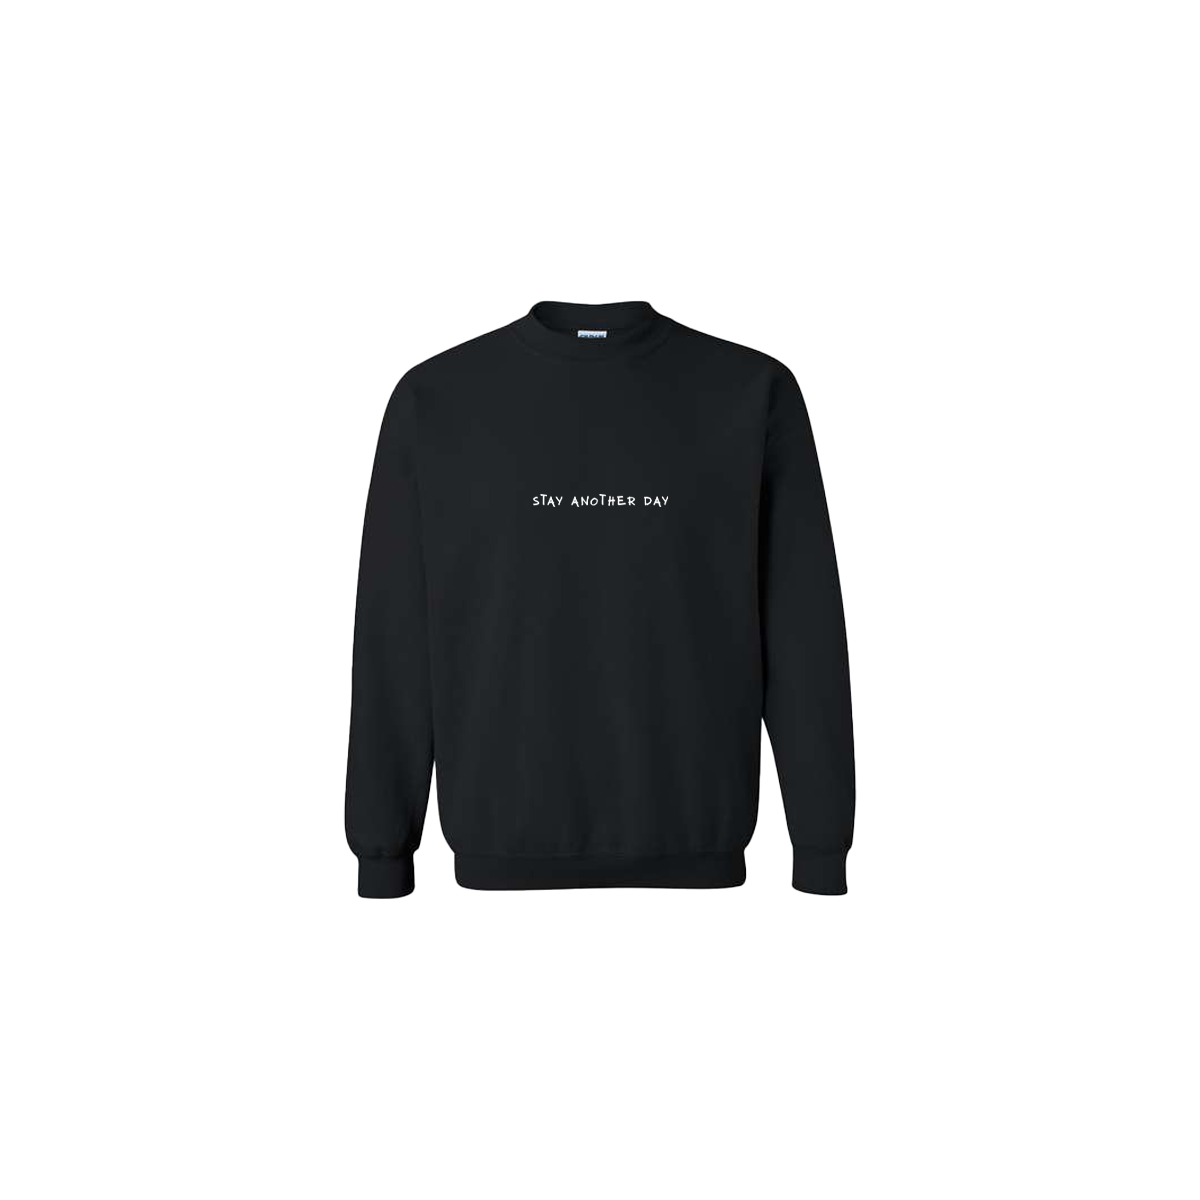 Stay Another Day Text Embroidered Black Crewneck - Mental Health Awareness Clothing